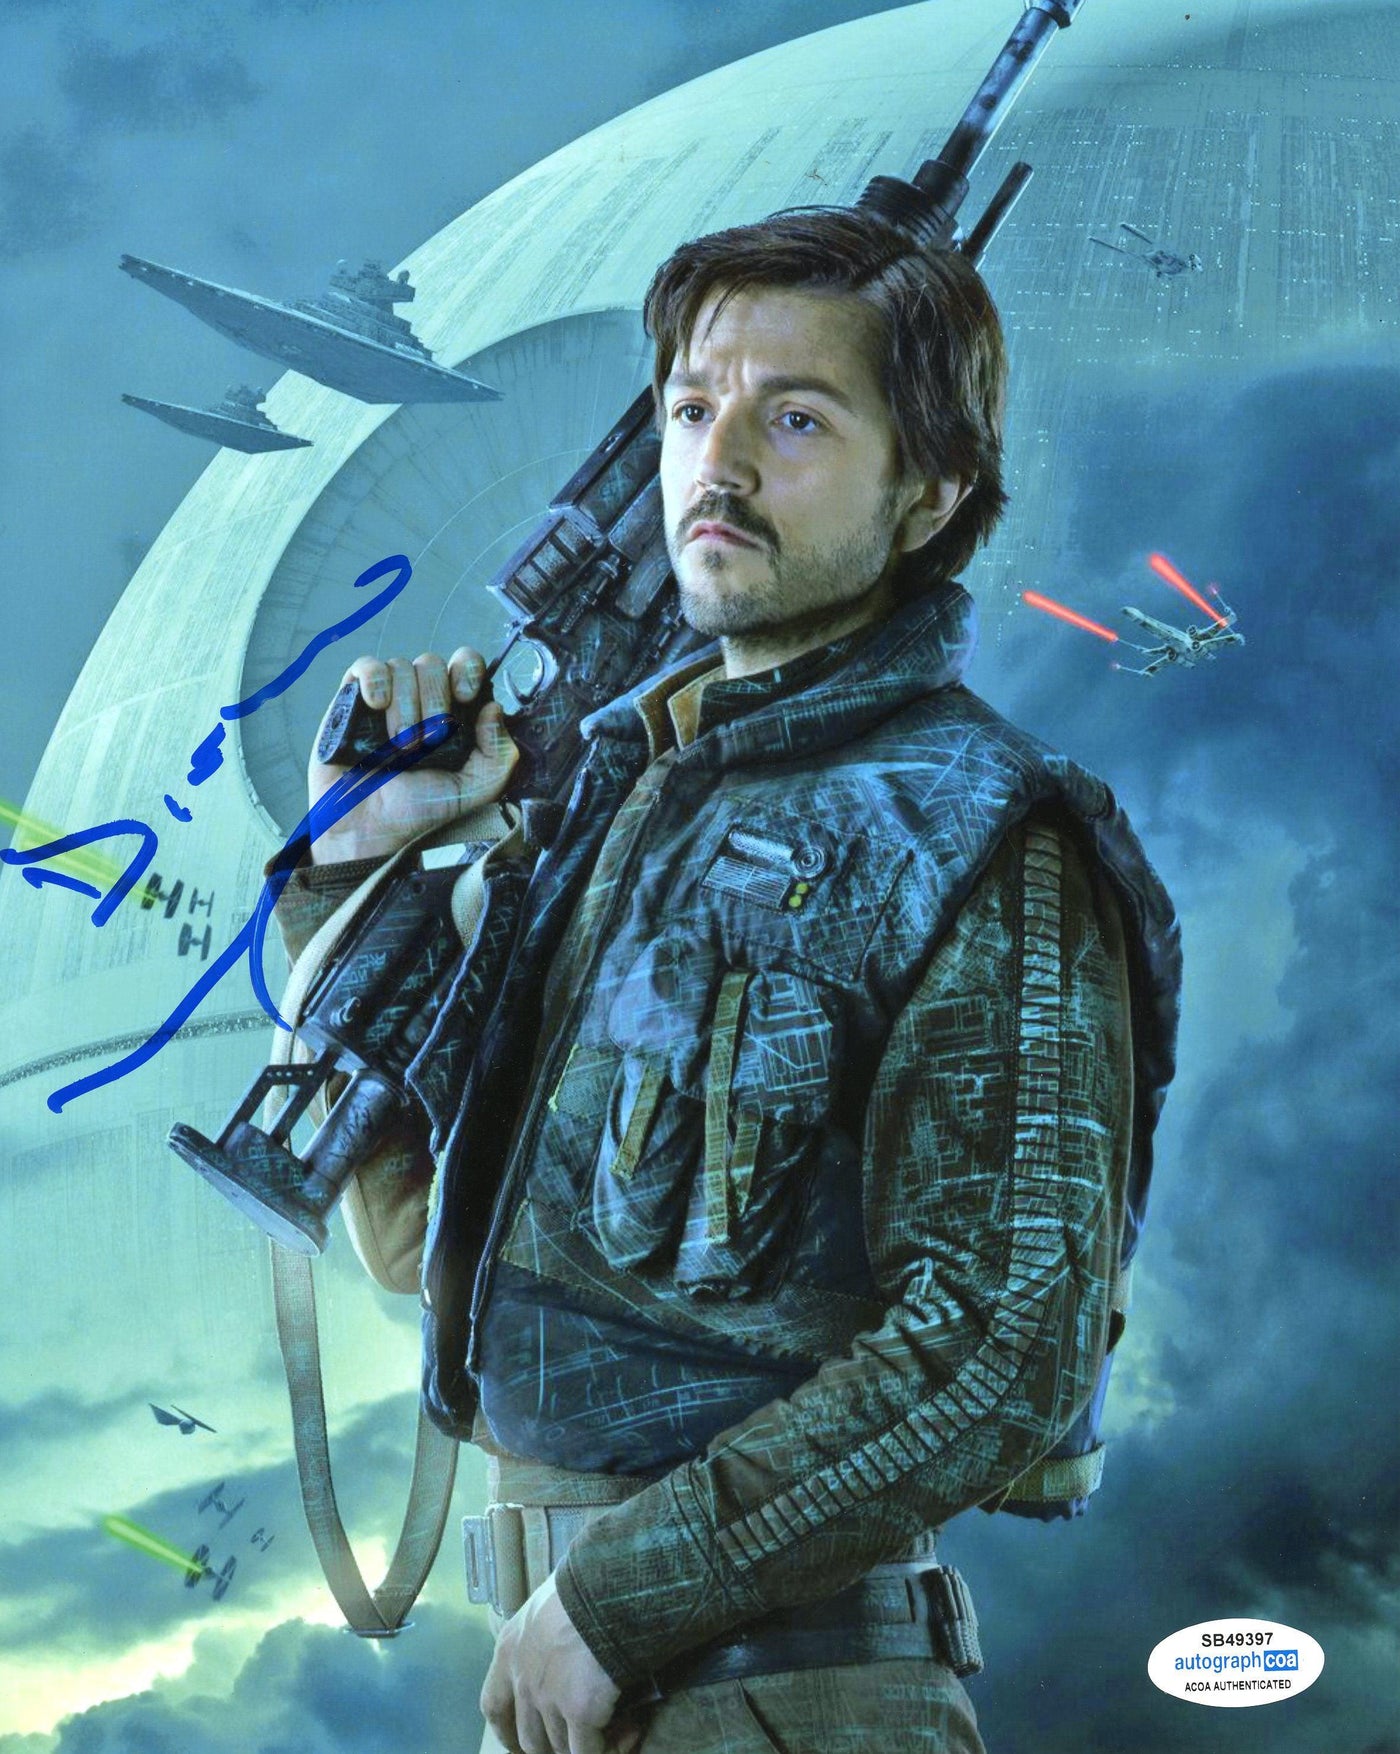 Diego Luna Signed 8x10 Photo Star Wars Rouge One Cassian Ando ACOA #2